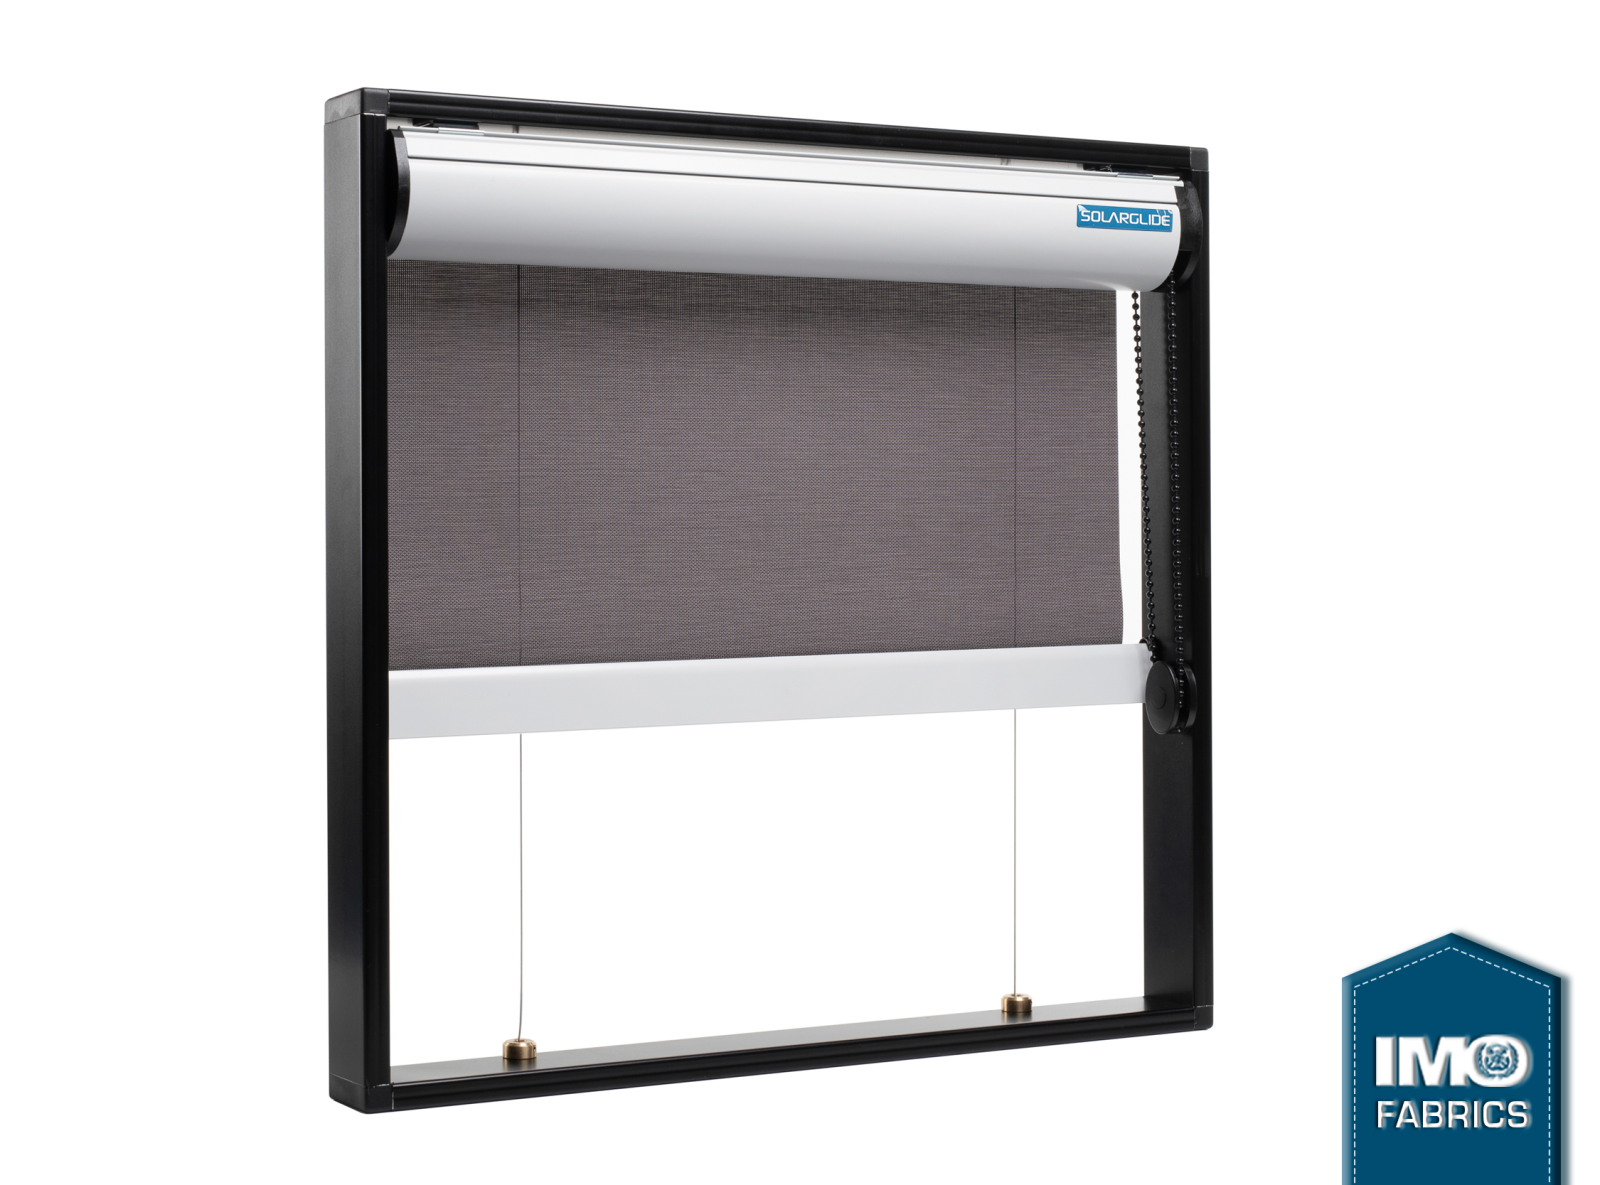 Solarglide Marine Dimout blinds product photograph